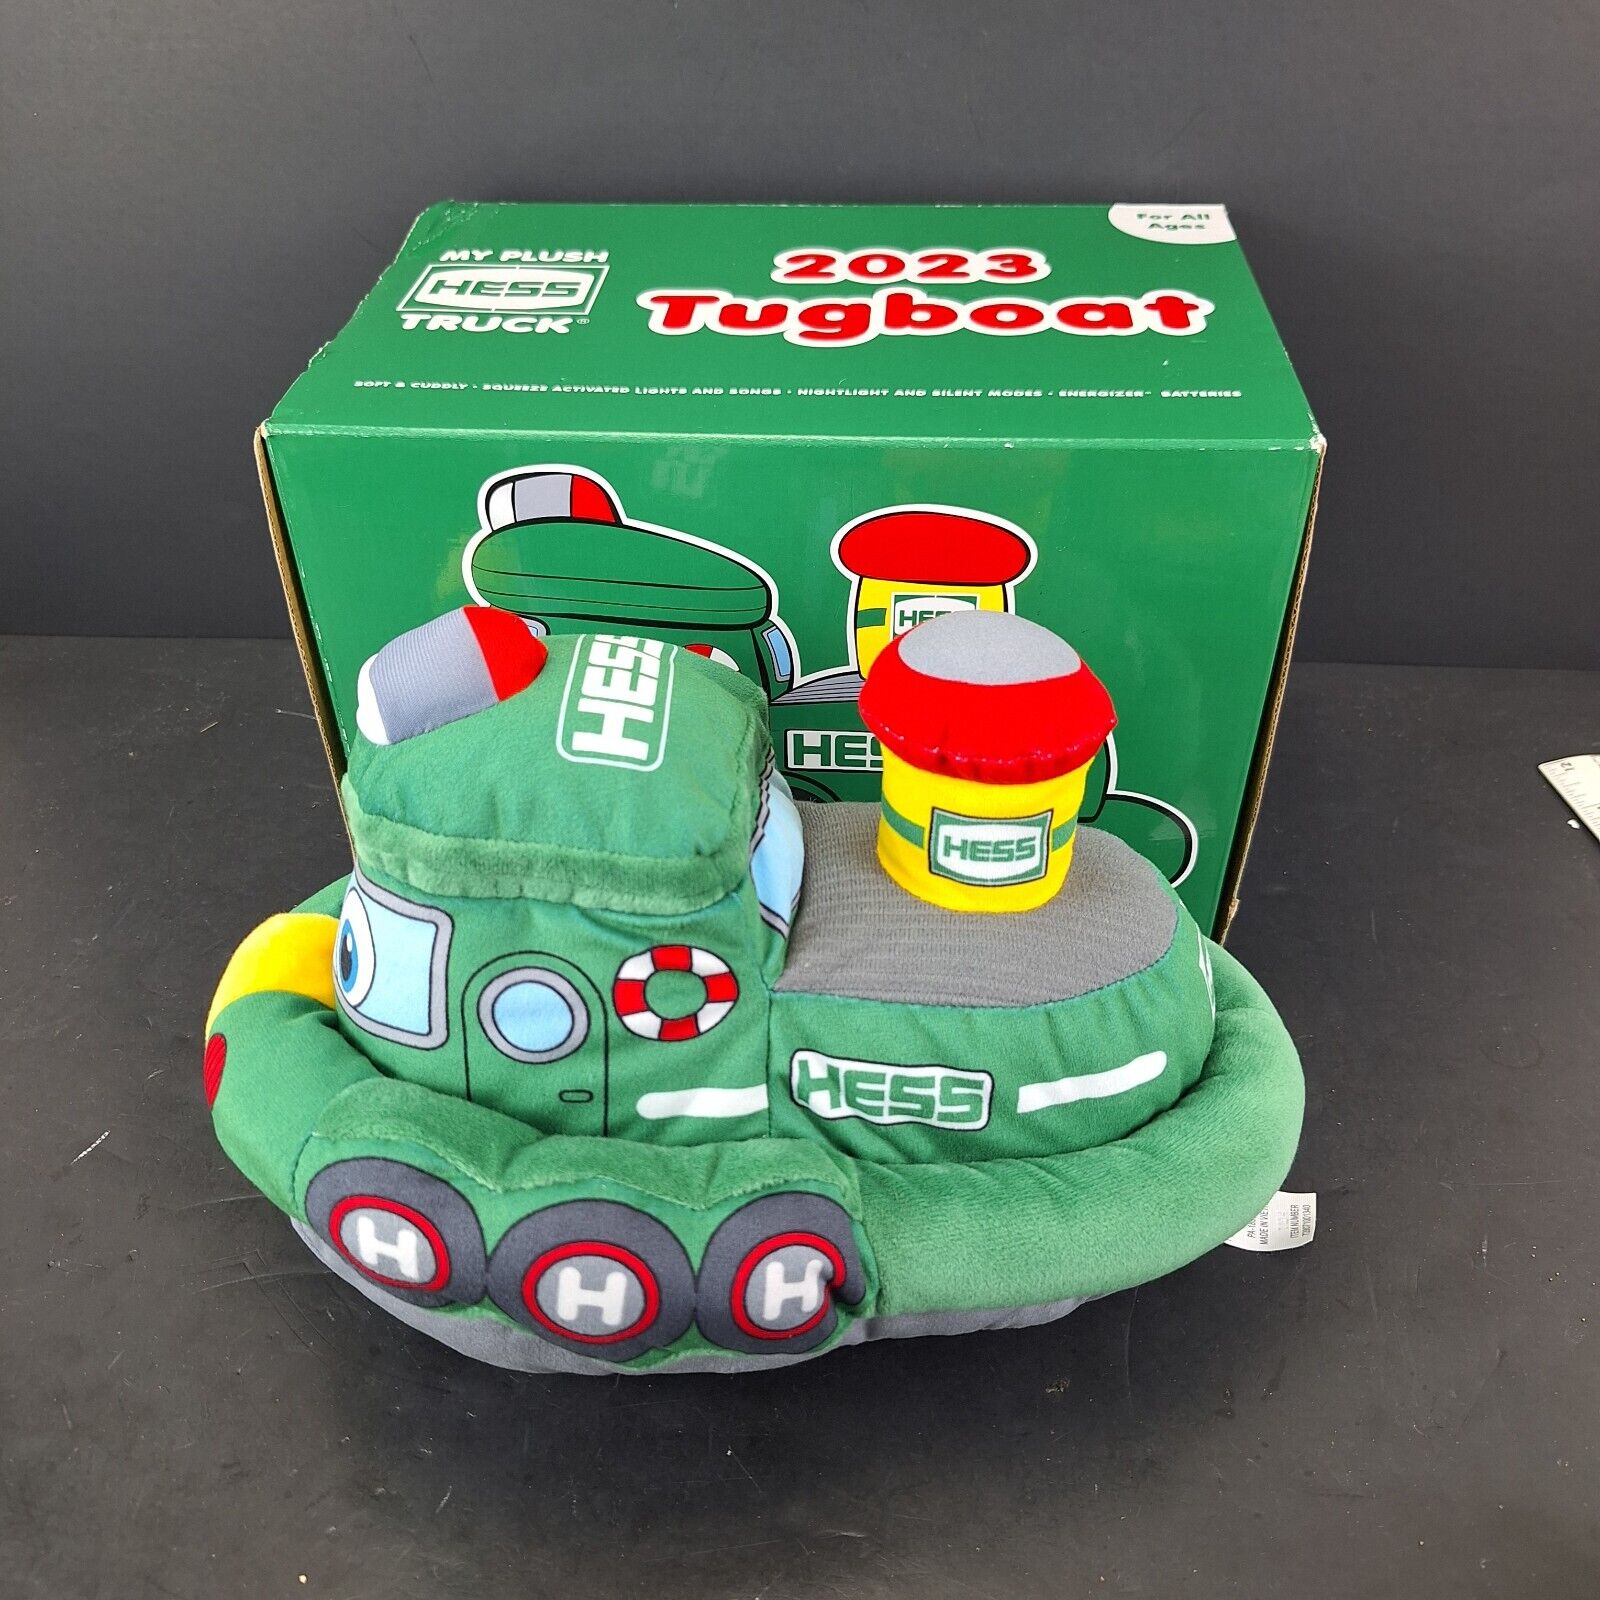 2023 Hess Tugboat Plush Toy with Original Box - Lights and Sound